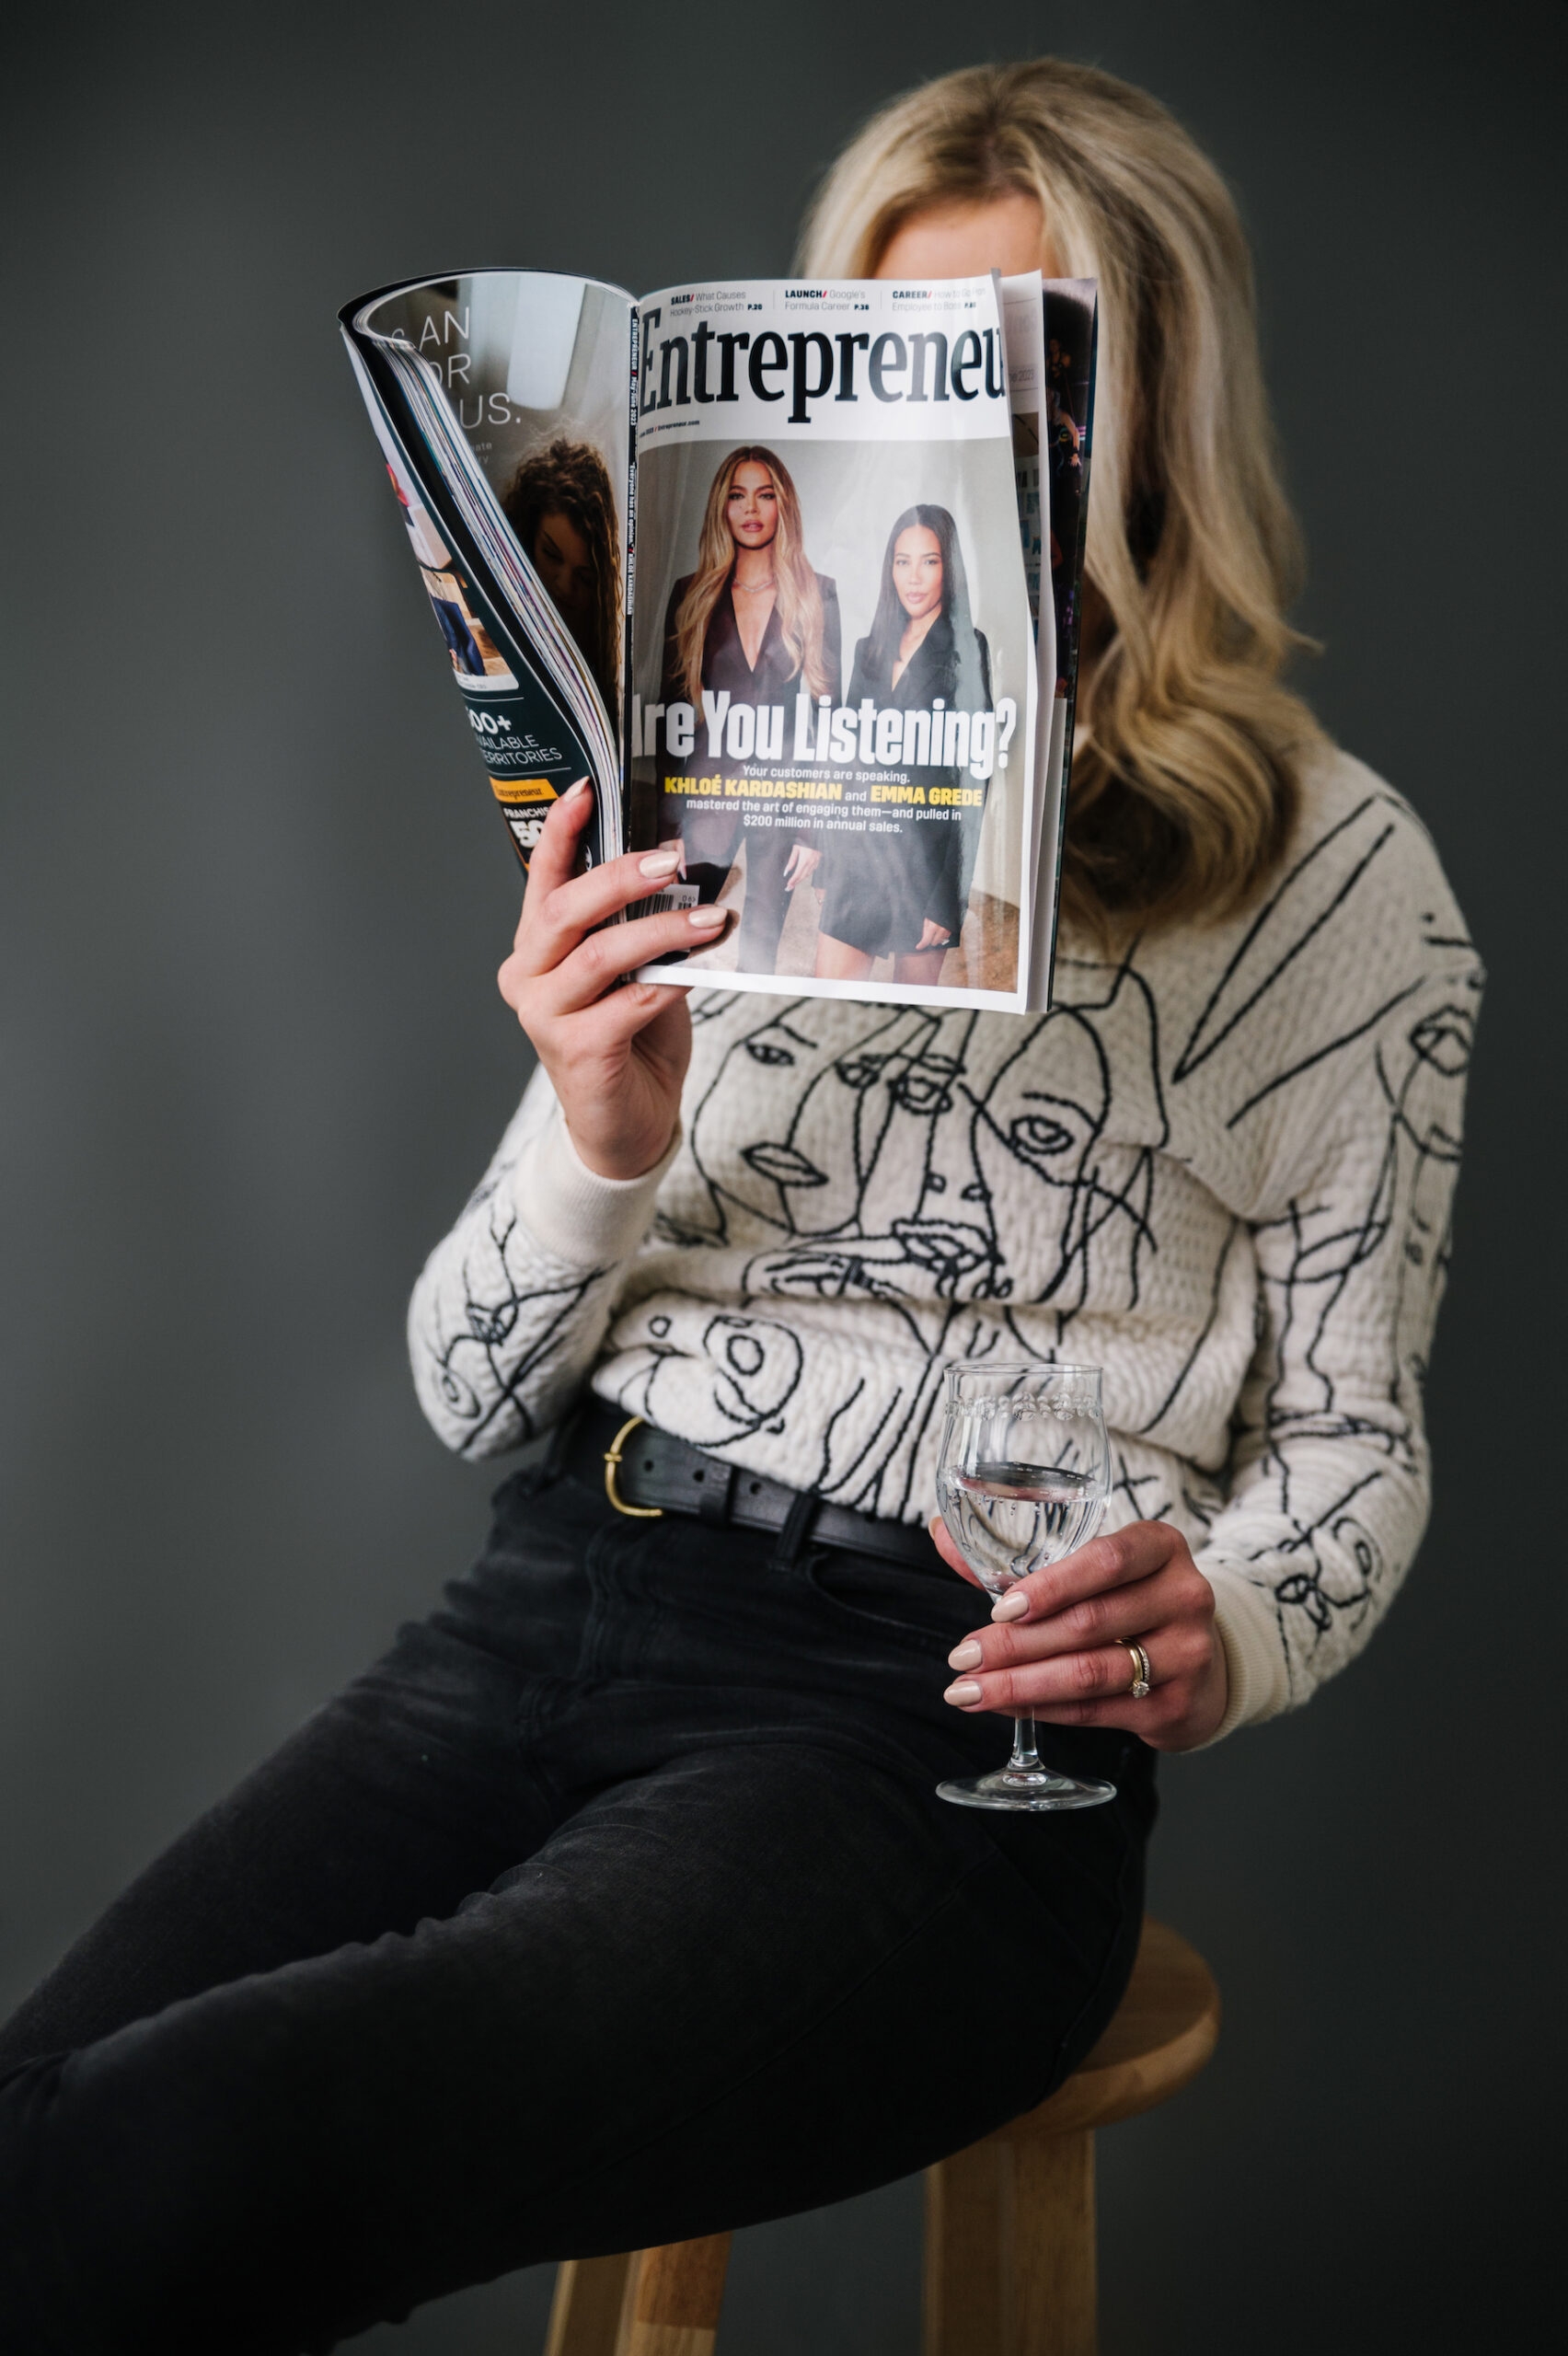 Sarah Klongerbo reading Entrepreneur magazine, representing the "5 Product Page Tips to Boost Your Ecommerce Conversion Rate" blog post